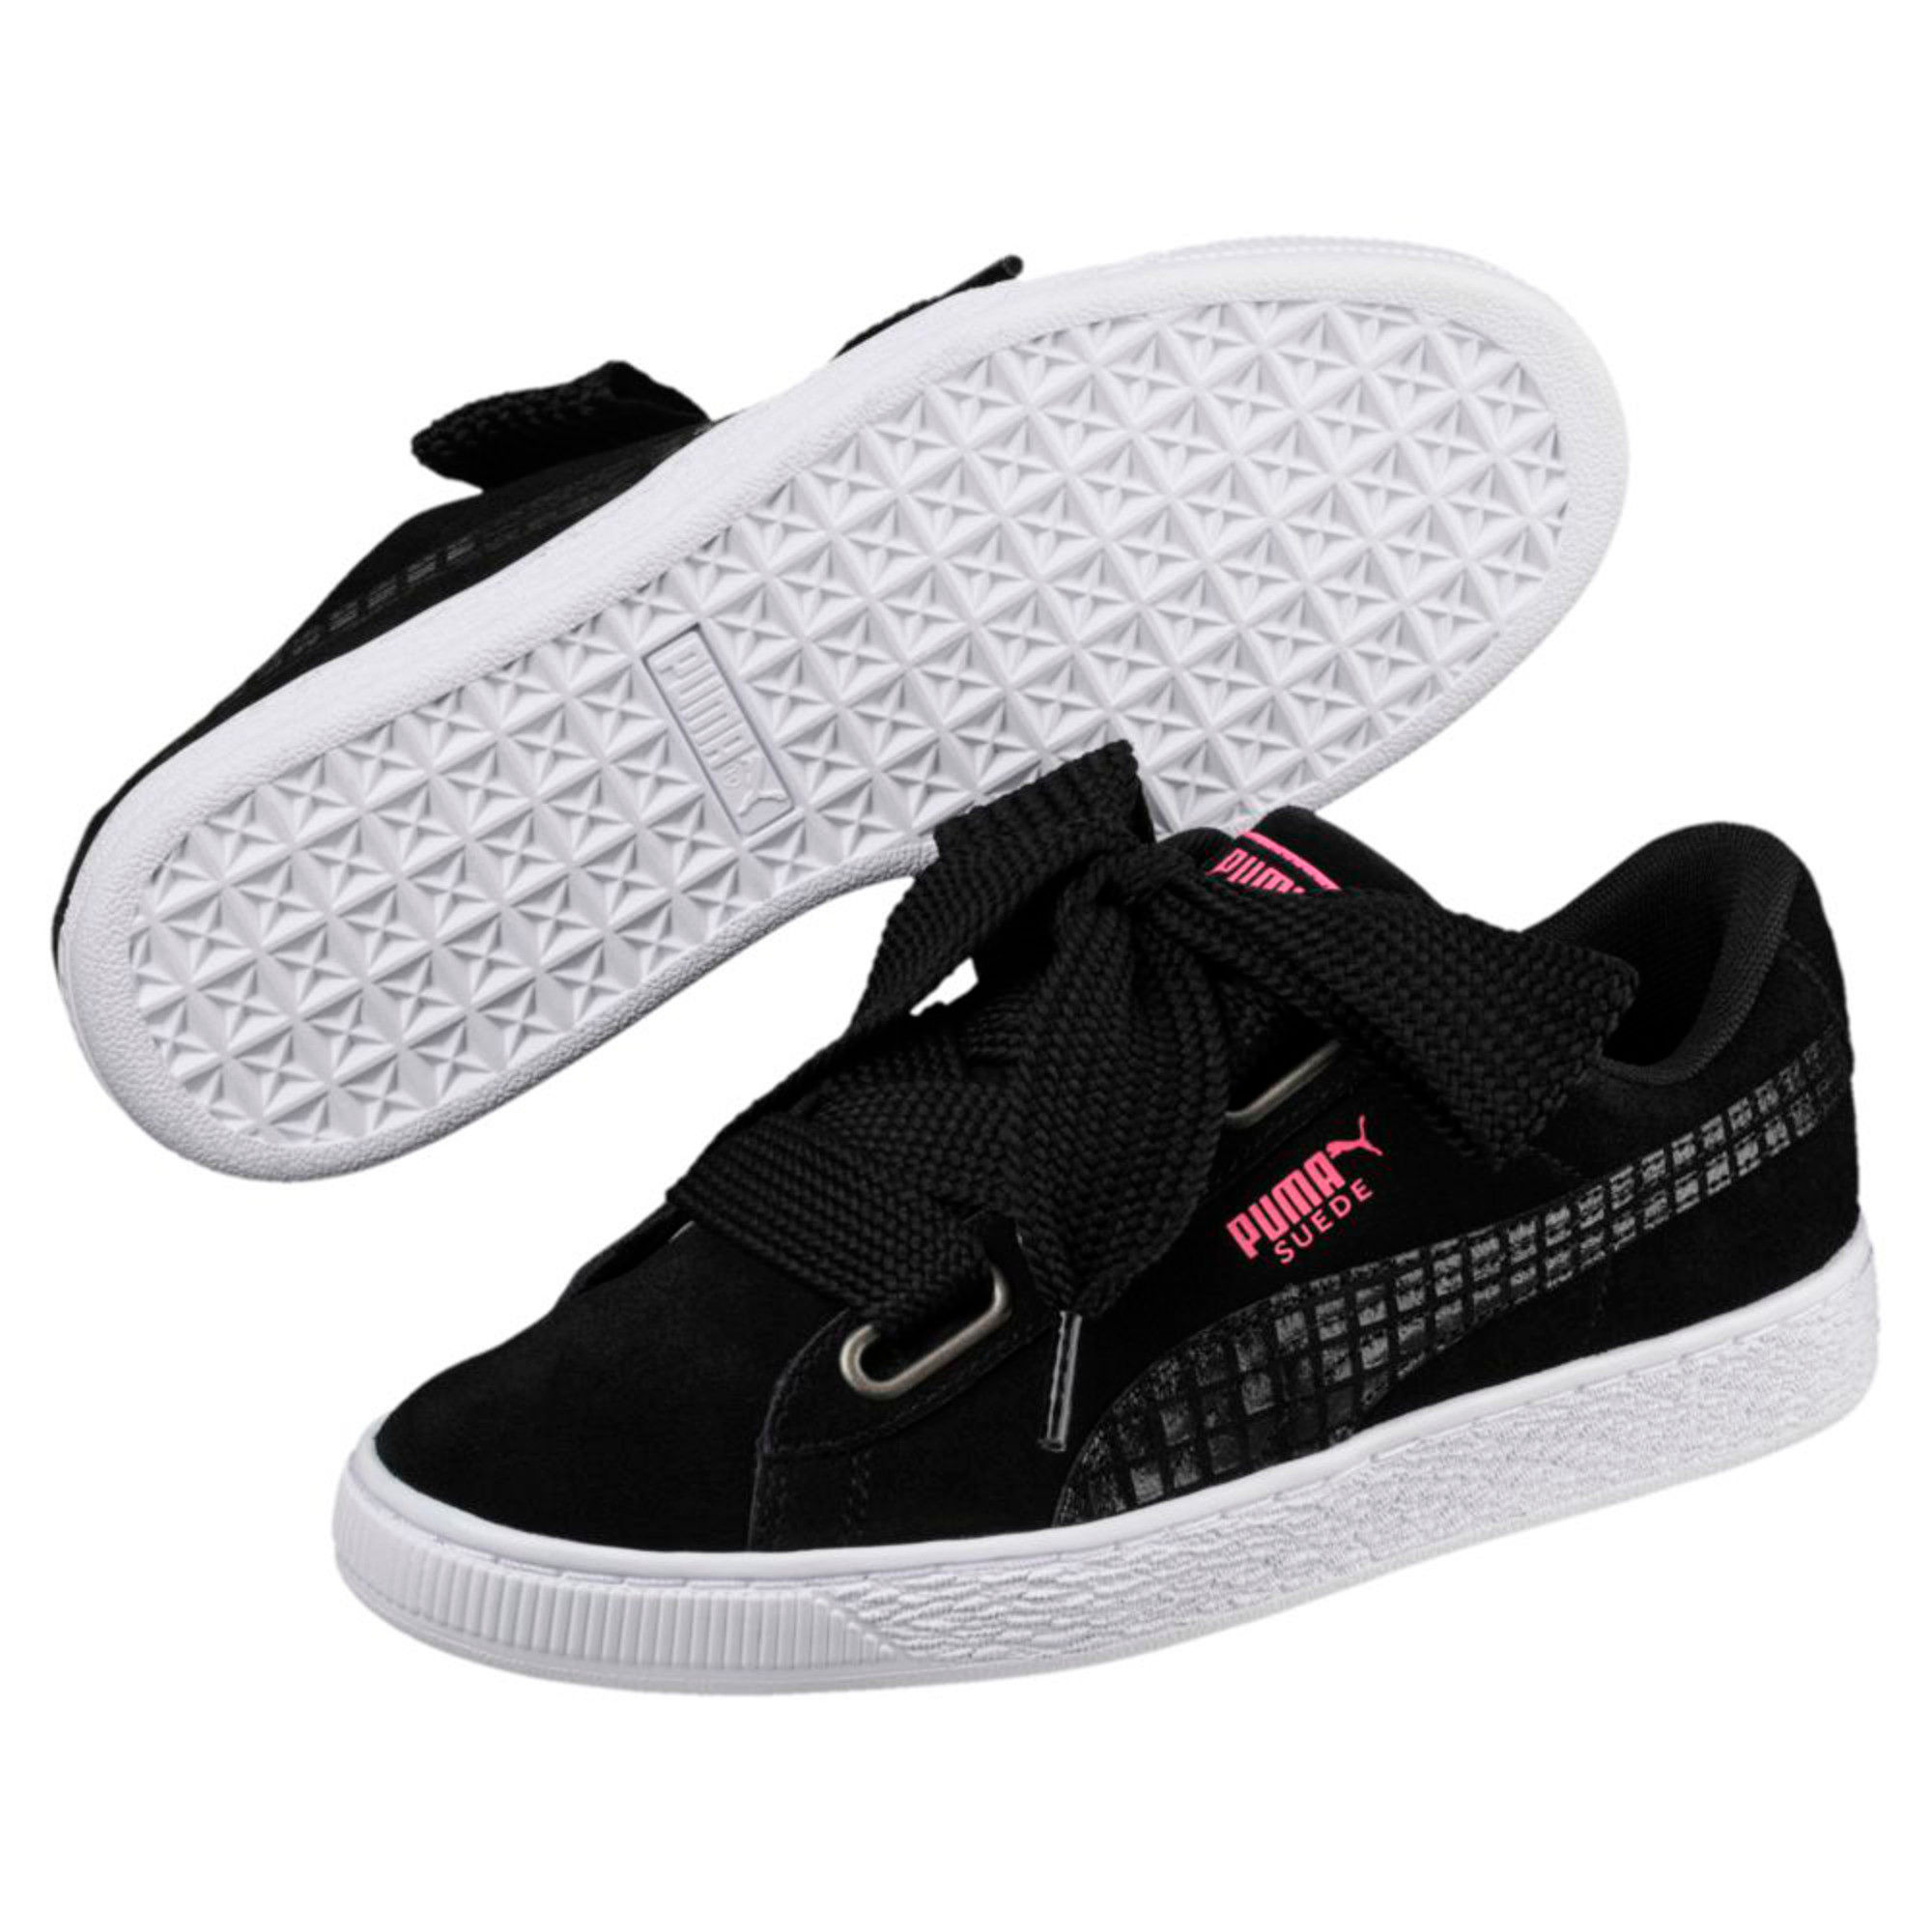 Puma Suede Heart Street 2 Women's Black Sneakers: Buy Puma Suede Heart  Street 2 Women's Black Sneakers Online at Best Price in India | Nykaa